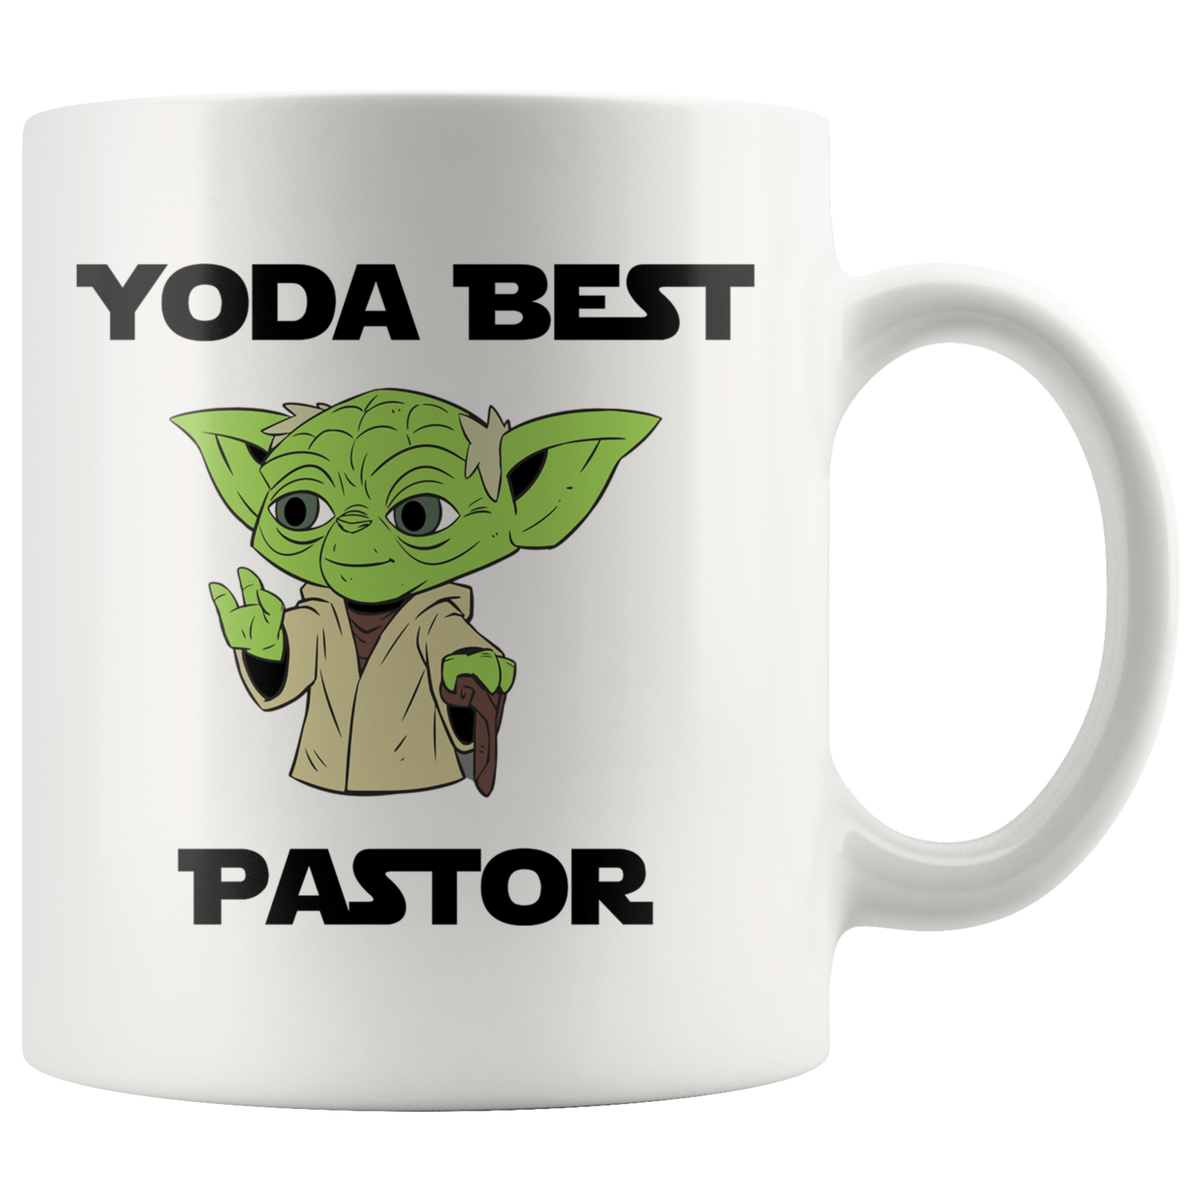 Let Me Pour You A Tall Glass Of Get Over It Funny Baby Yoda Coffee Mug sold  by Prepared-Preacher, SKU 5368029